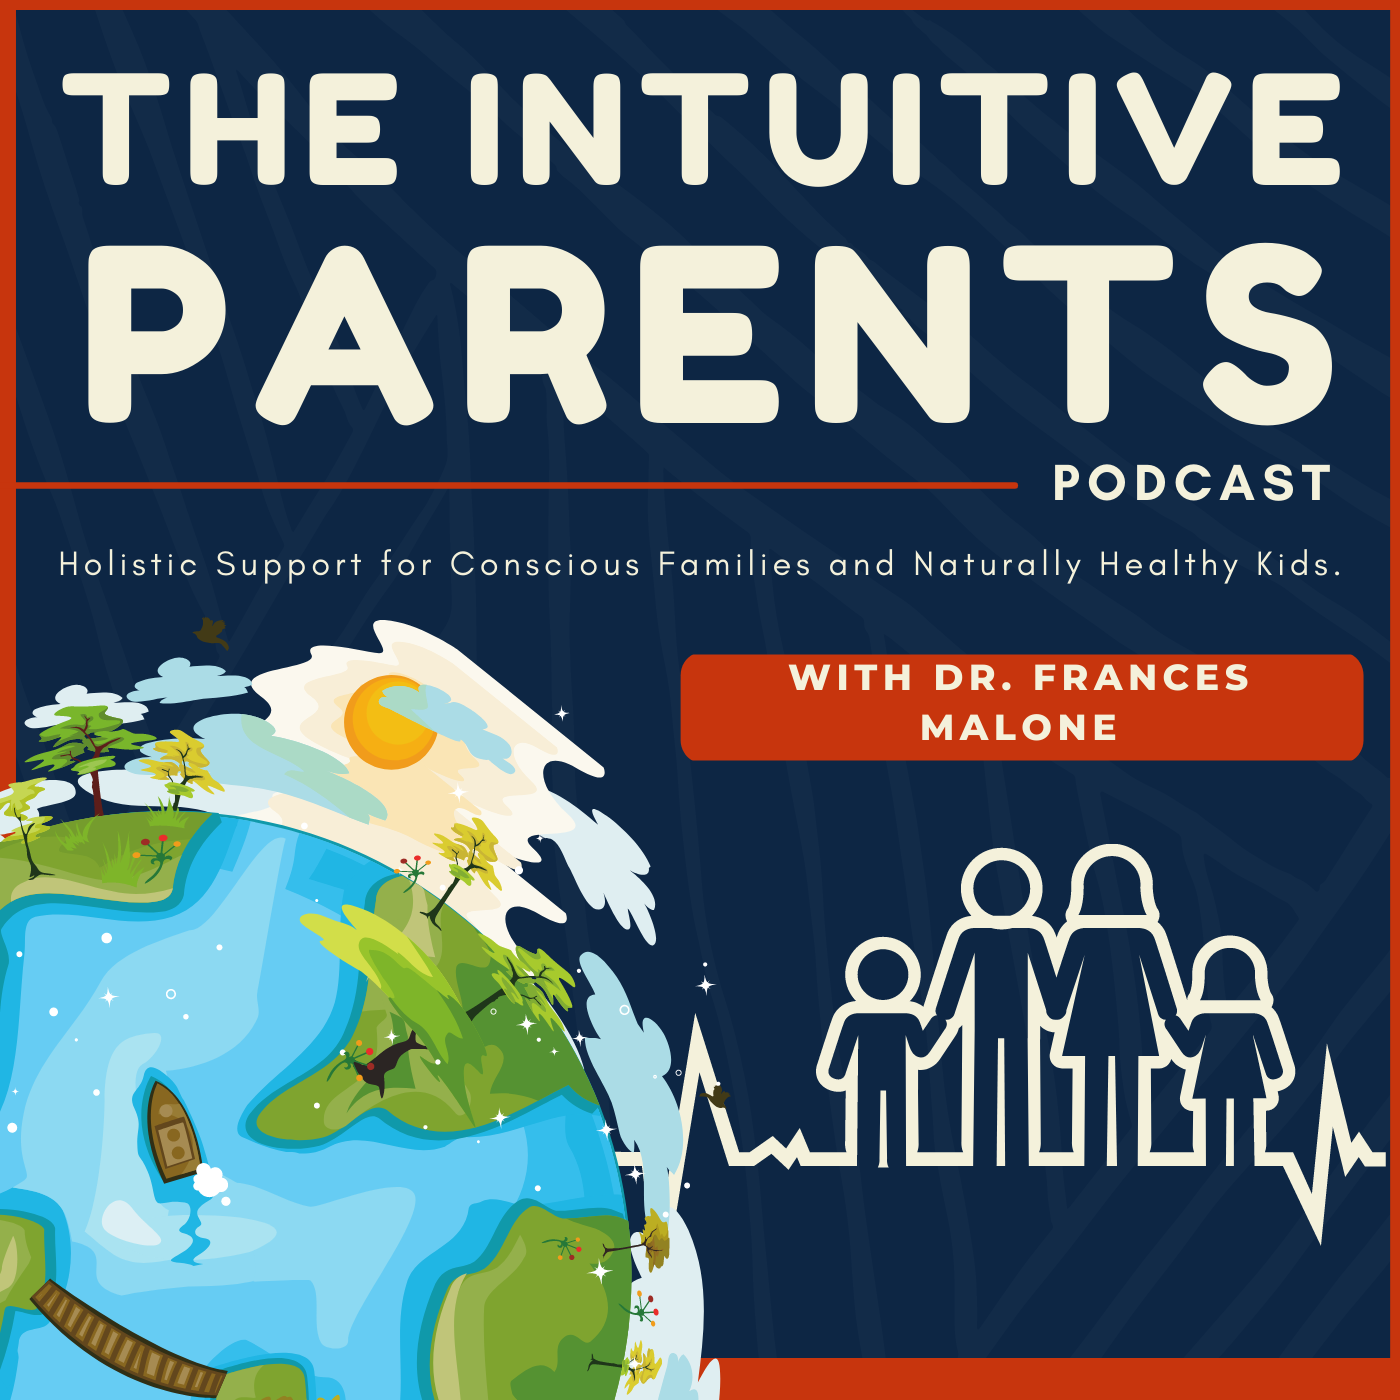 The Intuitive Parents Podcast with Dr. Frances Malone ARNP, PhD. Holistic support for conscious families and naturally healthy kids.